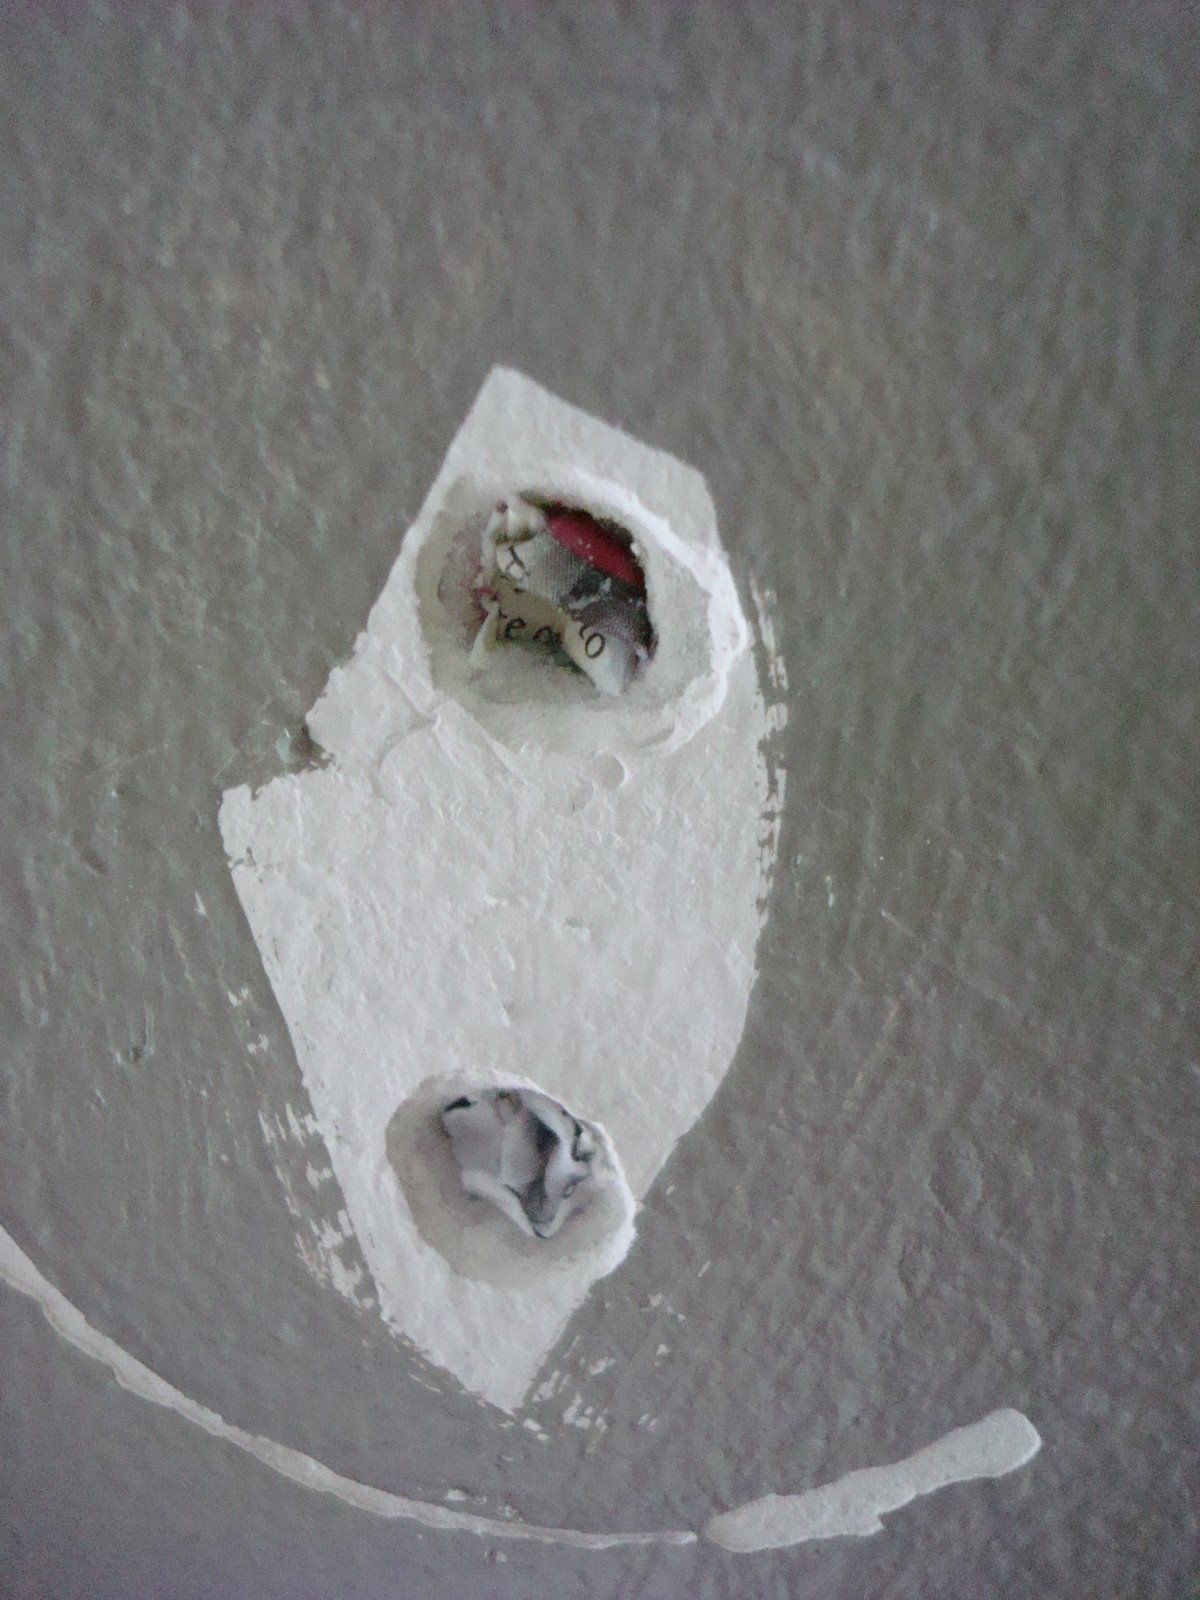 How to patch anchor holes in wall